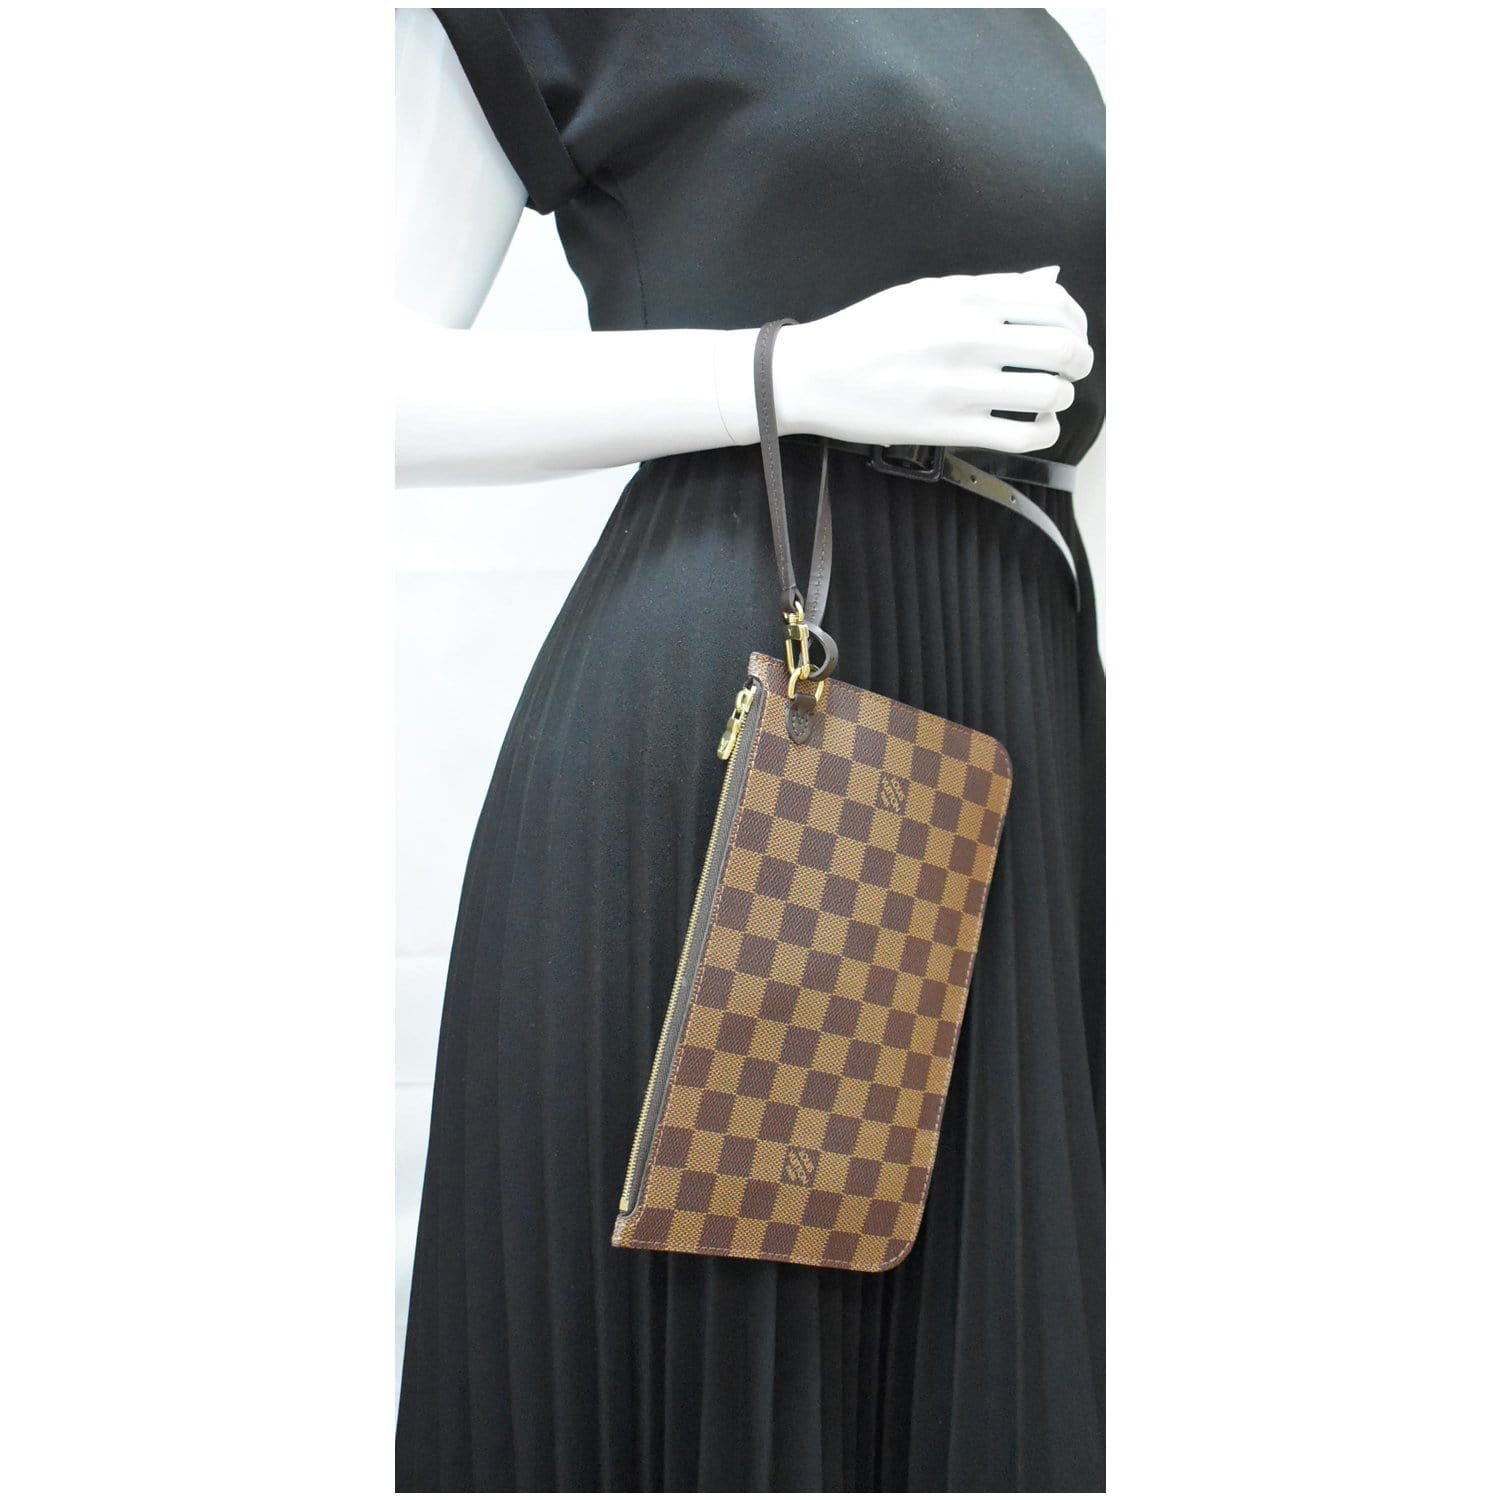 Louis Vuitton, Bags, Louis Vuitton Neverfull Mm Damier Ebne N4358 New  With Wristlet Discontinued